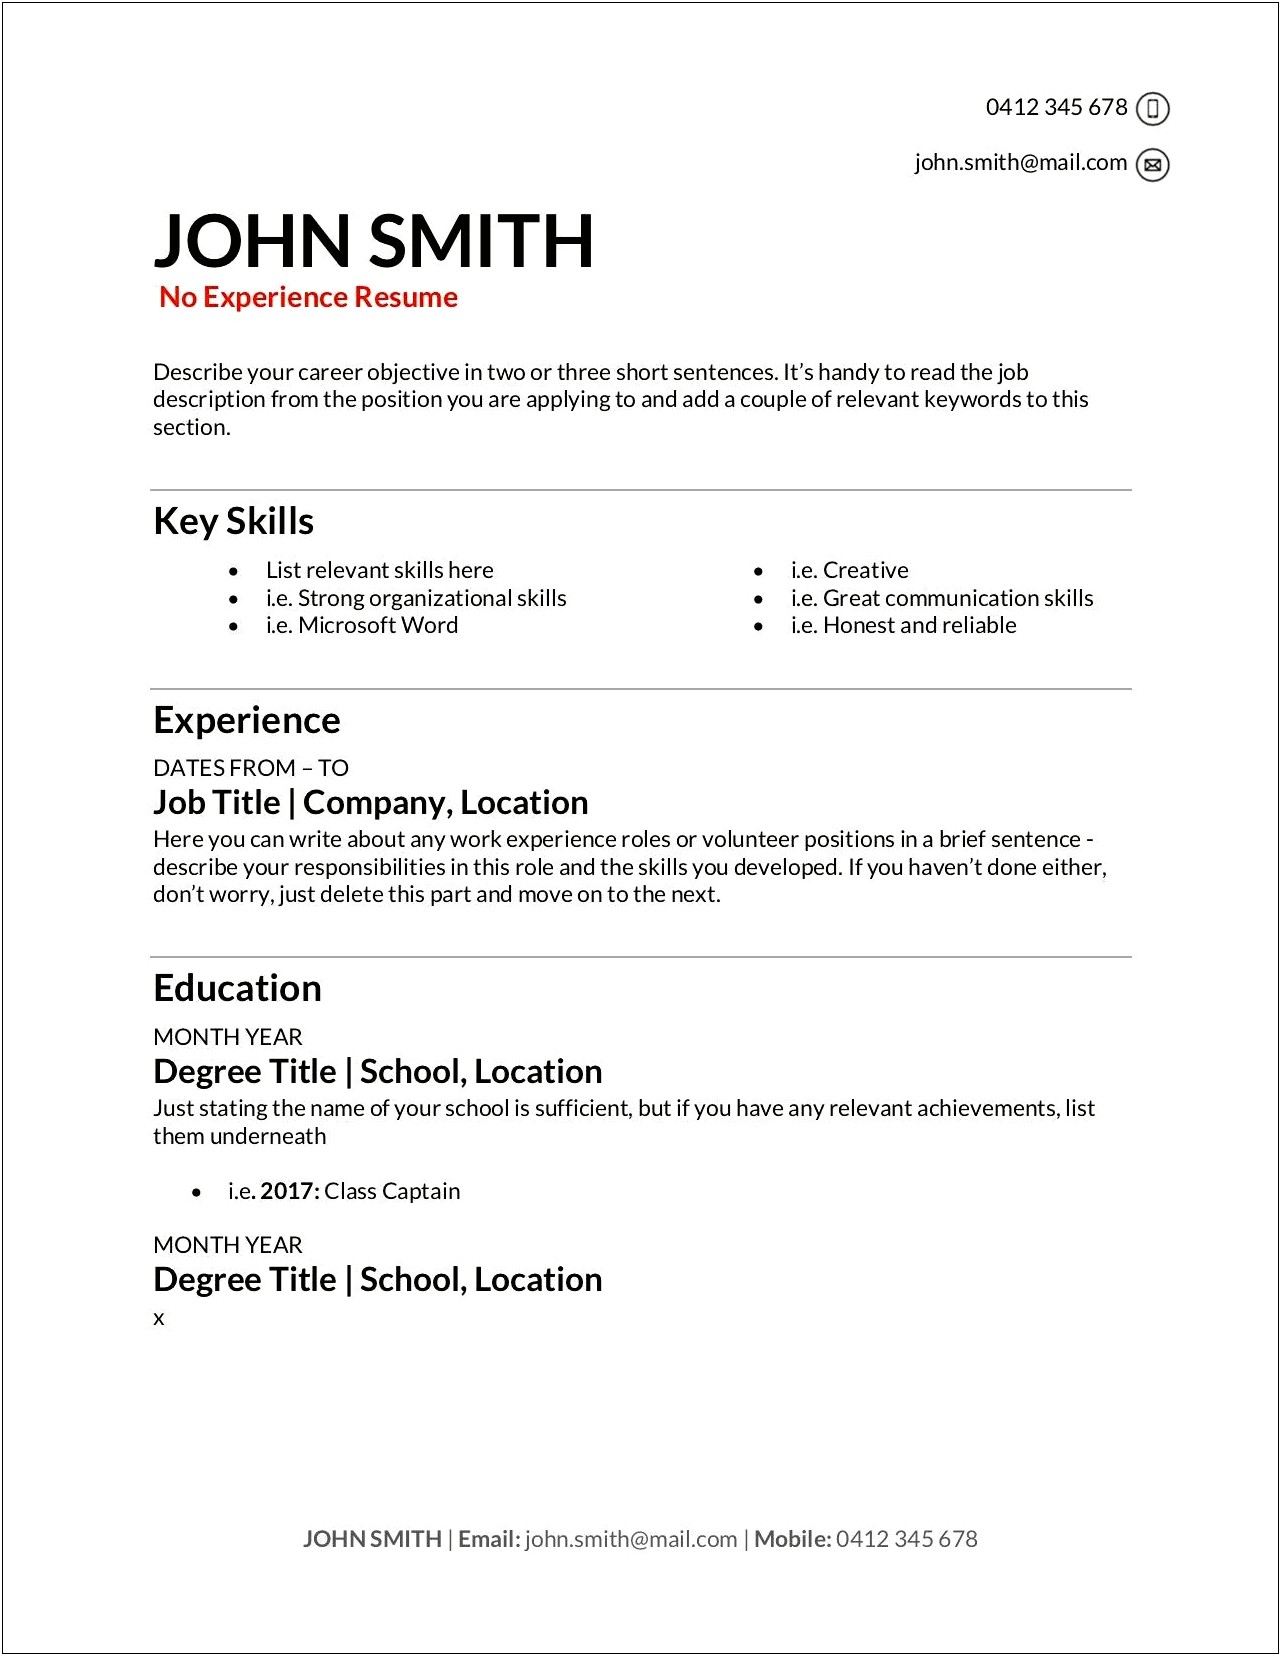 Listing Job Experience On A Resume